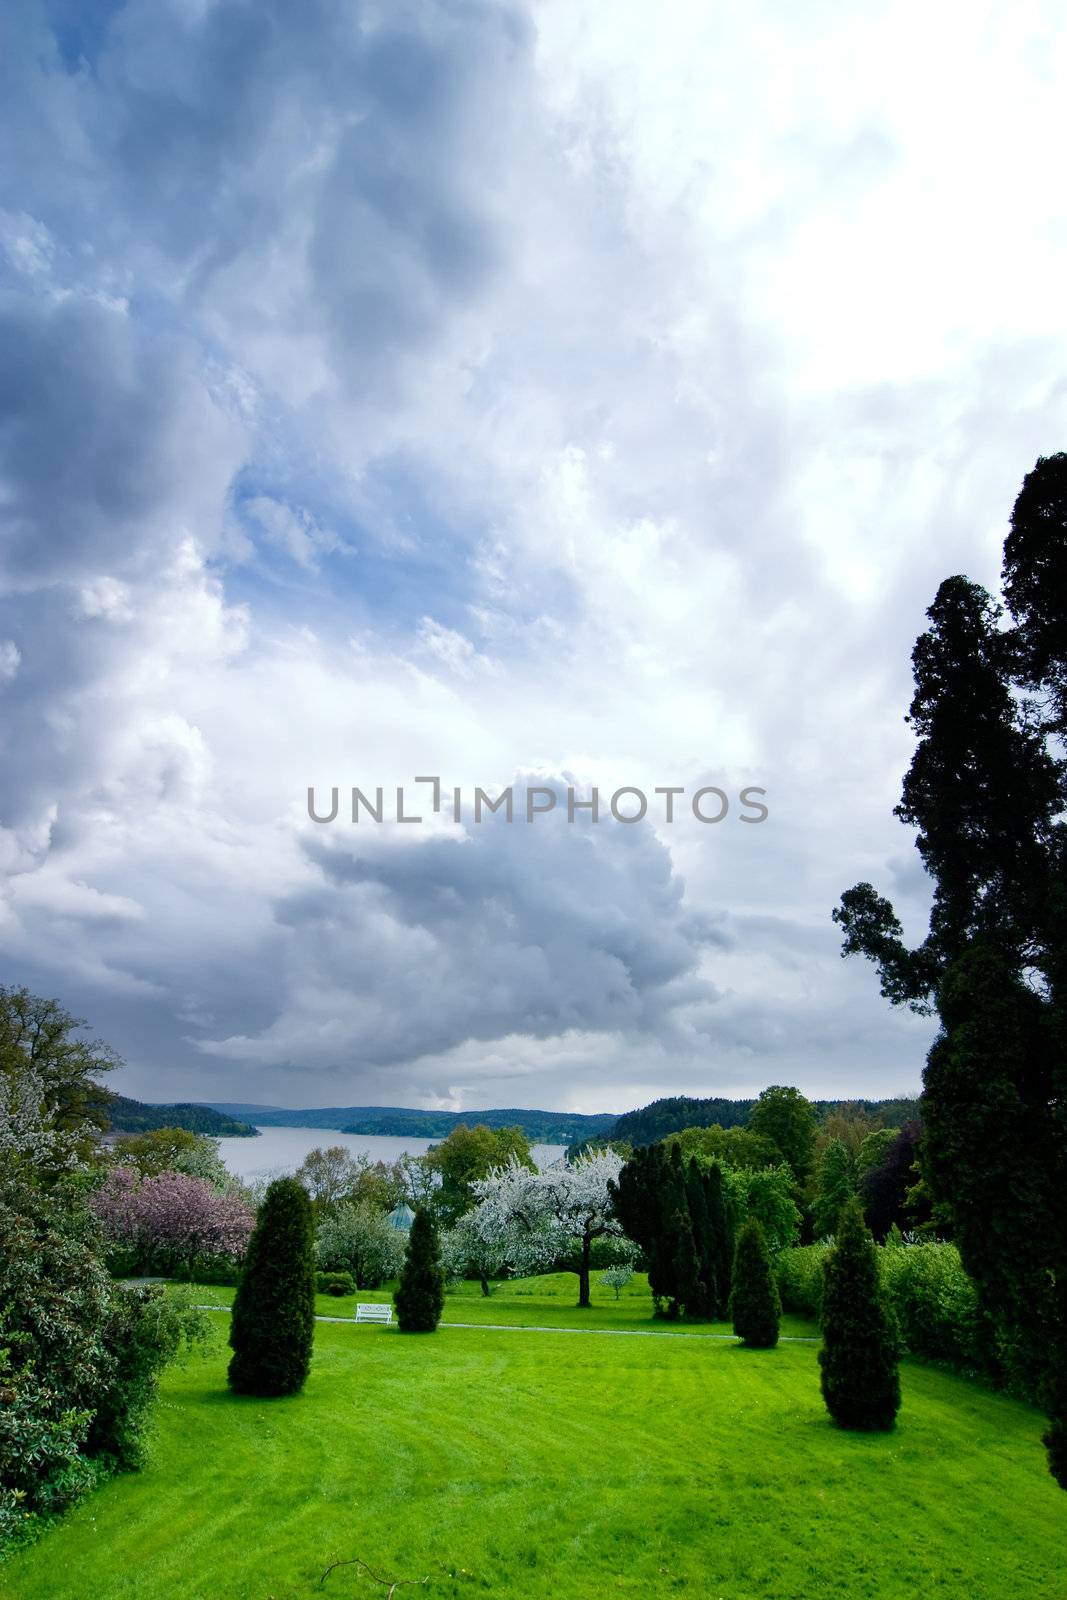 A beautiful park or garden with a dramatic sky in the background